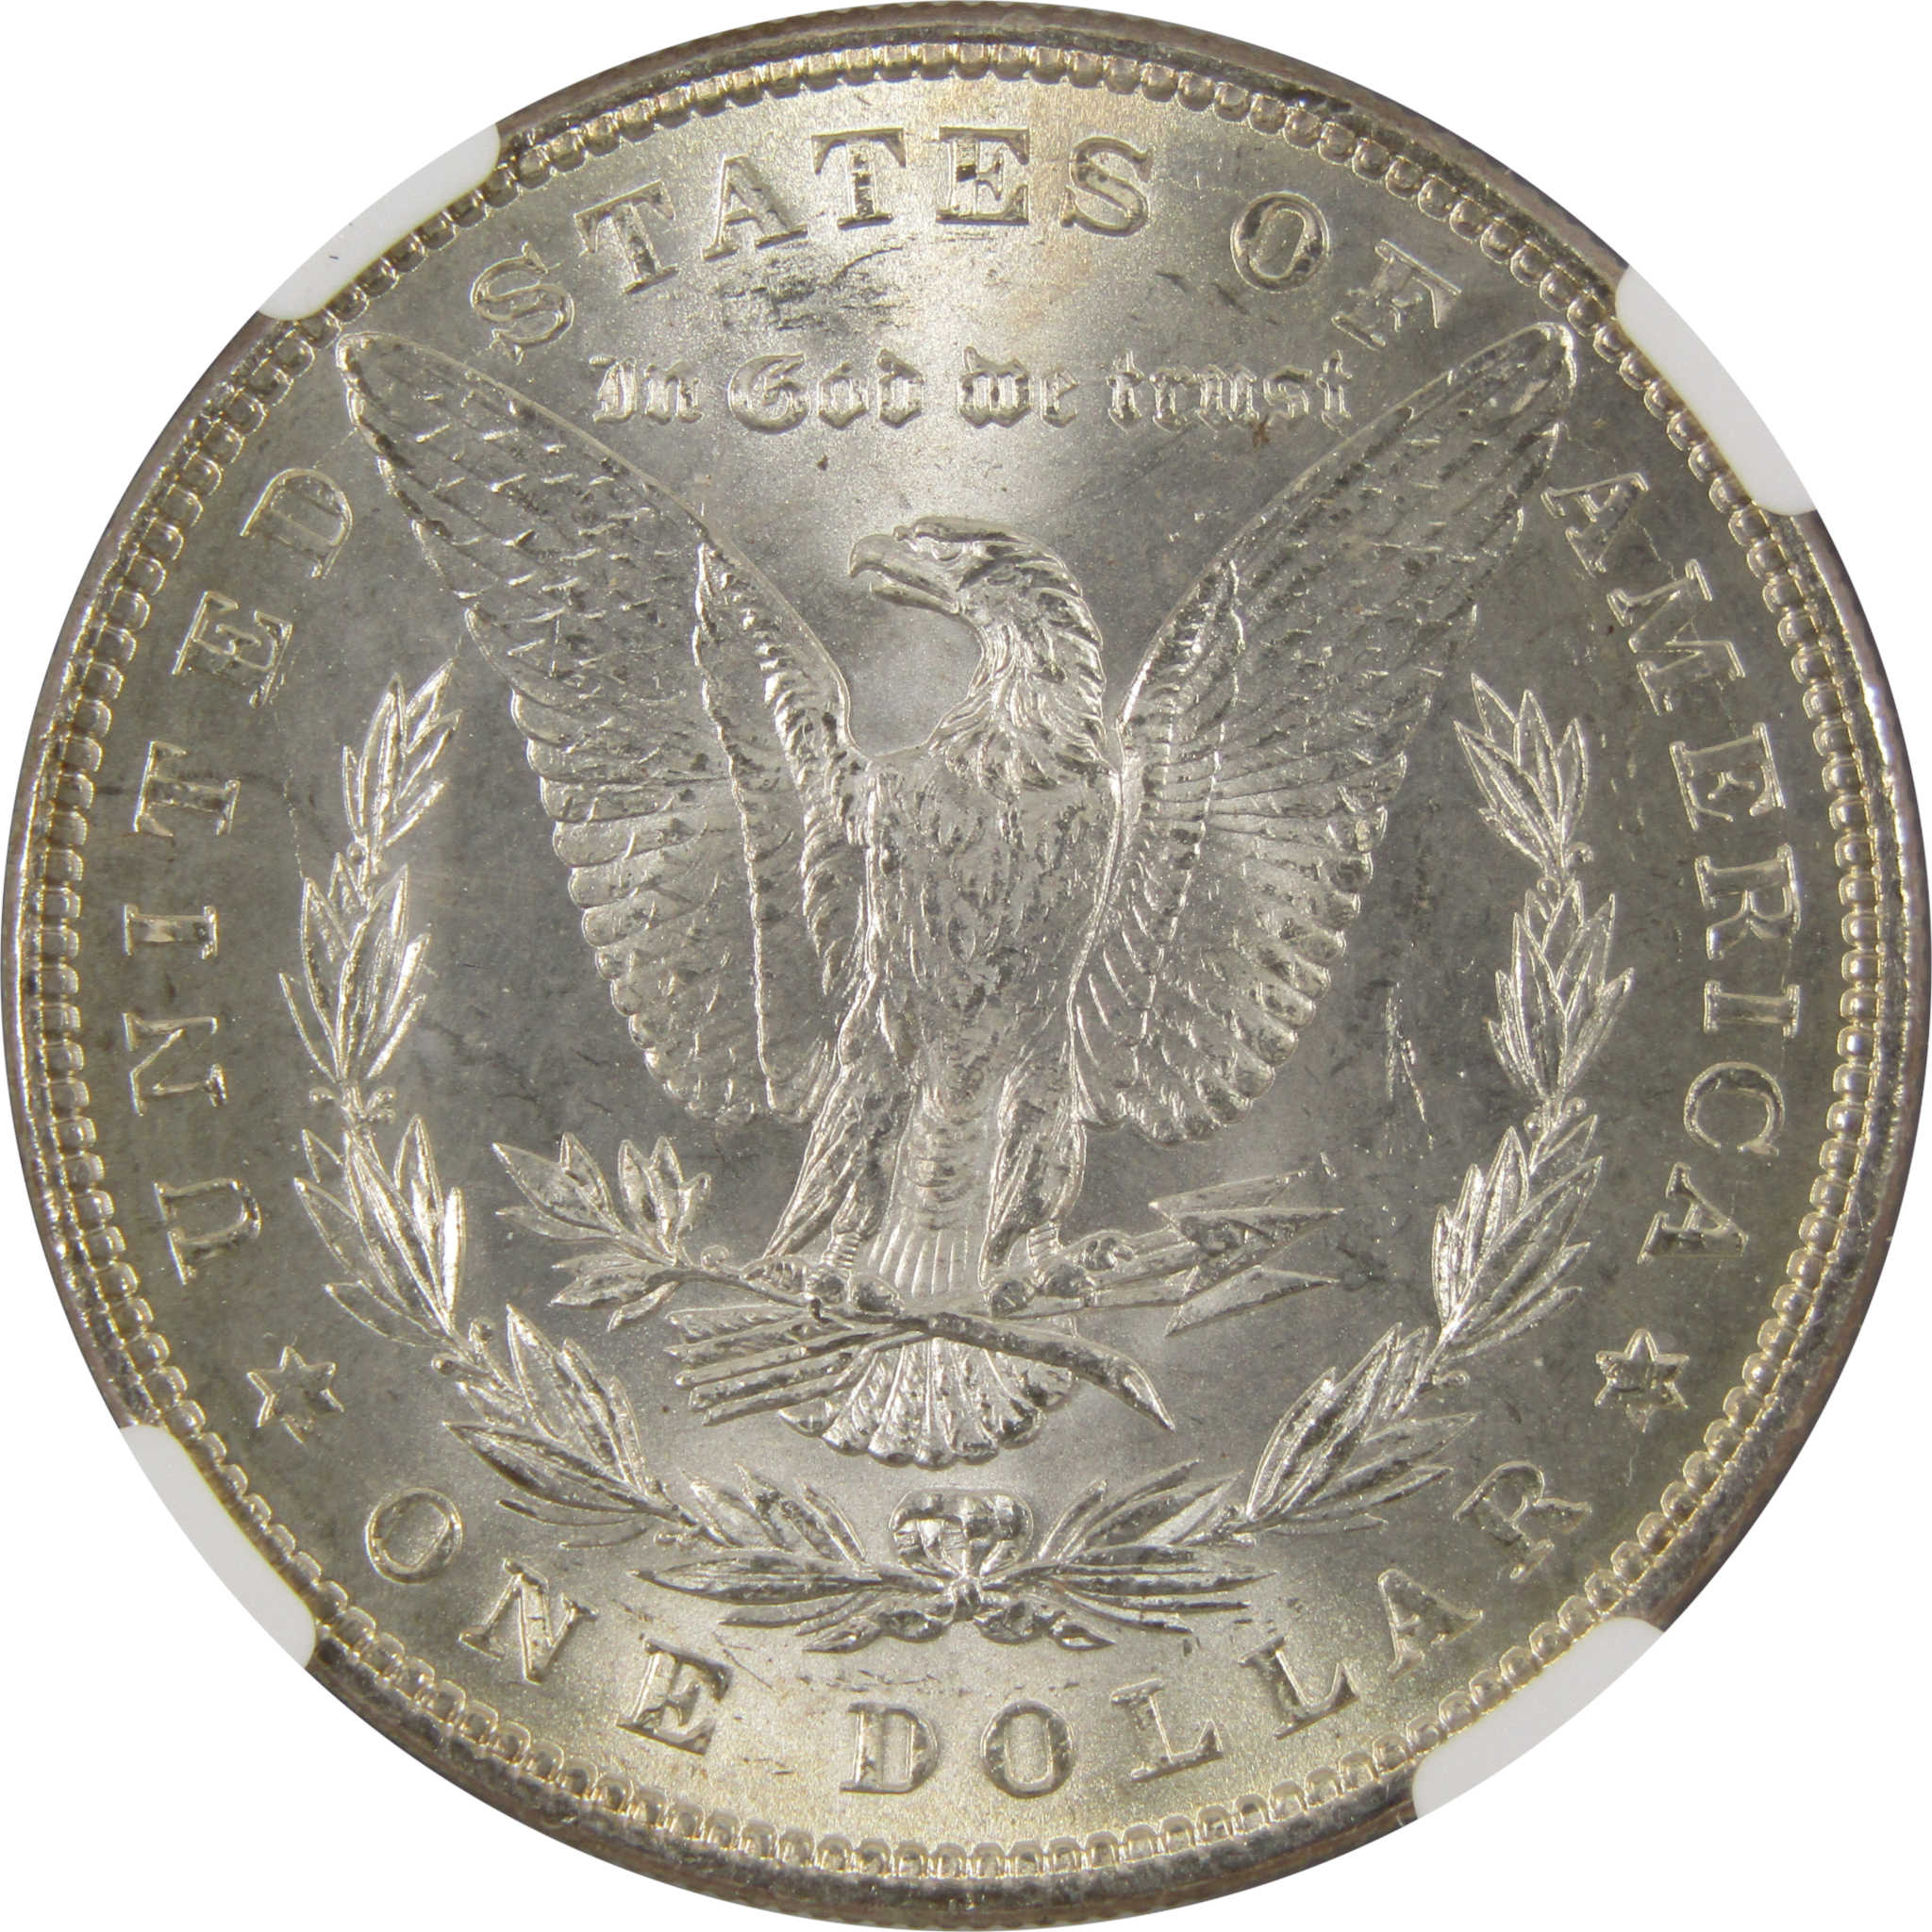 1884 Morgan Dollar MS 65 NGC 90% Silver $1 Uncirculated Coin SKU:I6169 - Morgan coin - Morgan silver dollar - Morgan silver dollar for sale - Profile Coins &amp; Collectibles